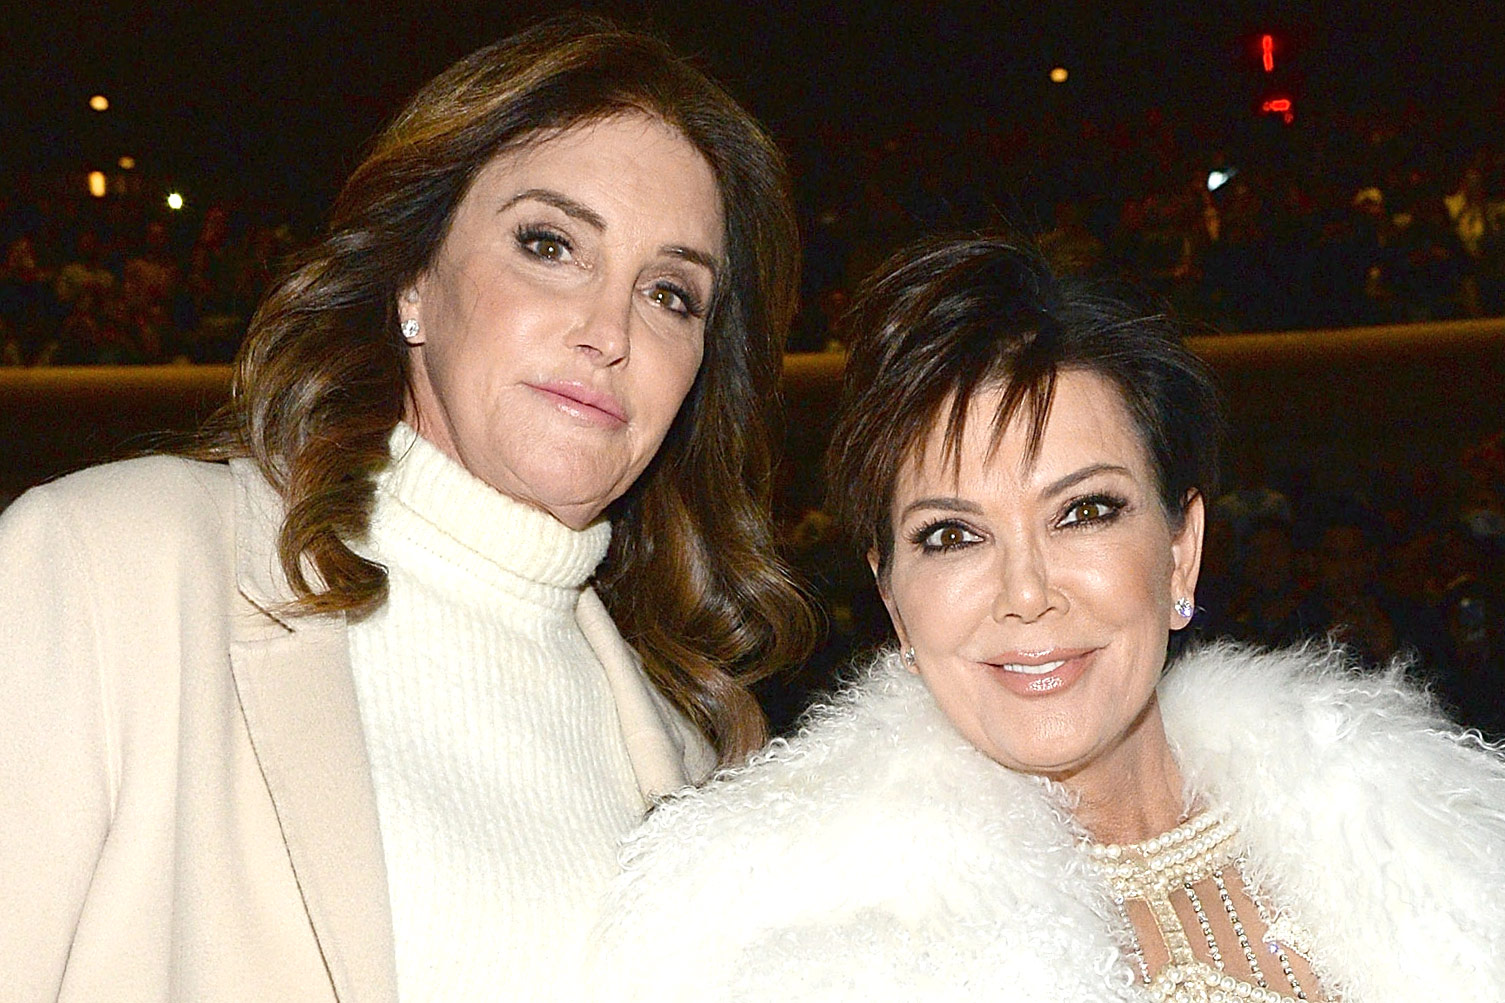 Kris Vs Caitlyn Jenner Who Is More Influential Now And Who